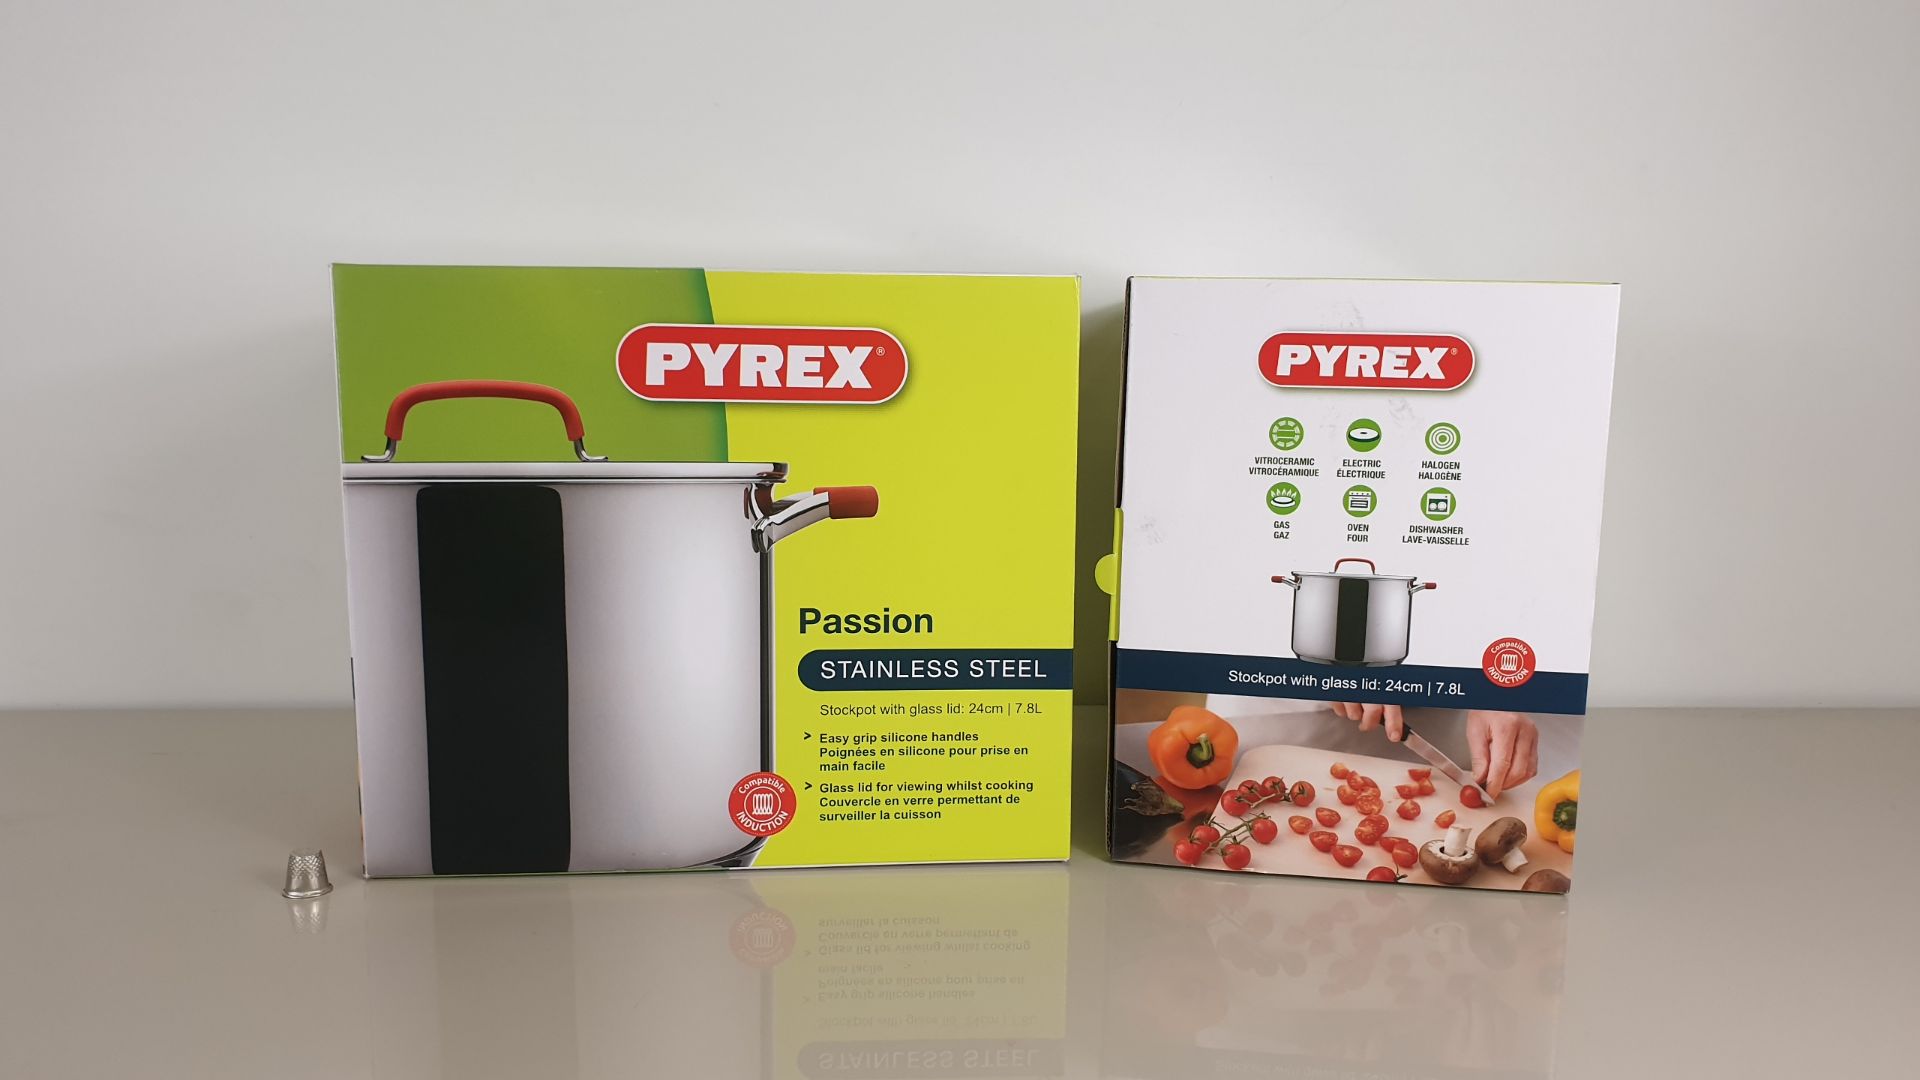 8 X BRAND NEW BOXED PYREX PASSION STAINLESS STEEL STOCKPOT WITH GLASS LID - 24CM / 7.8L - IN 4